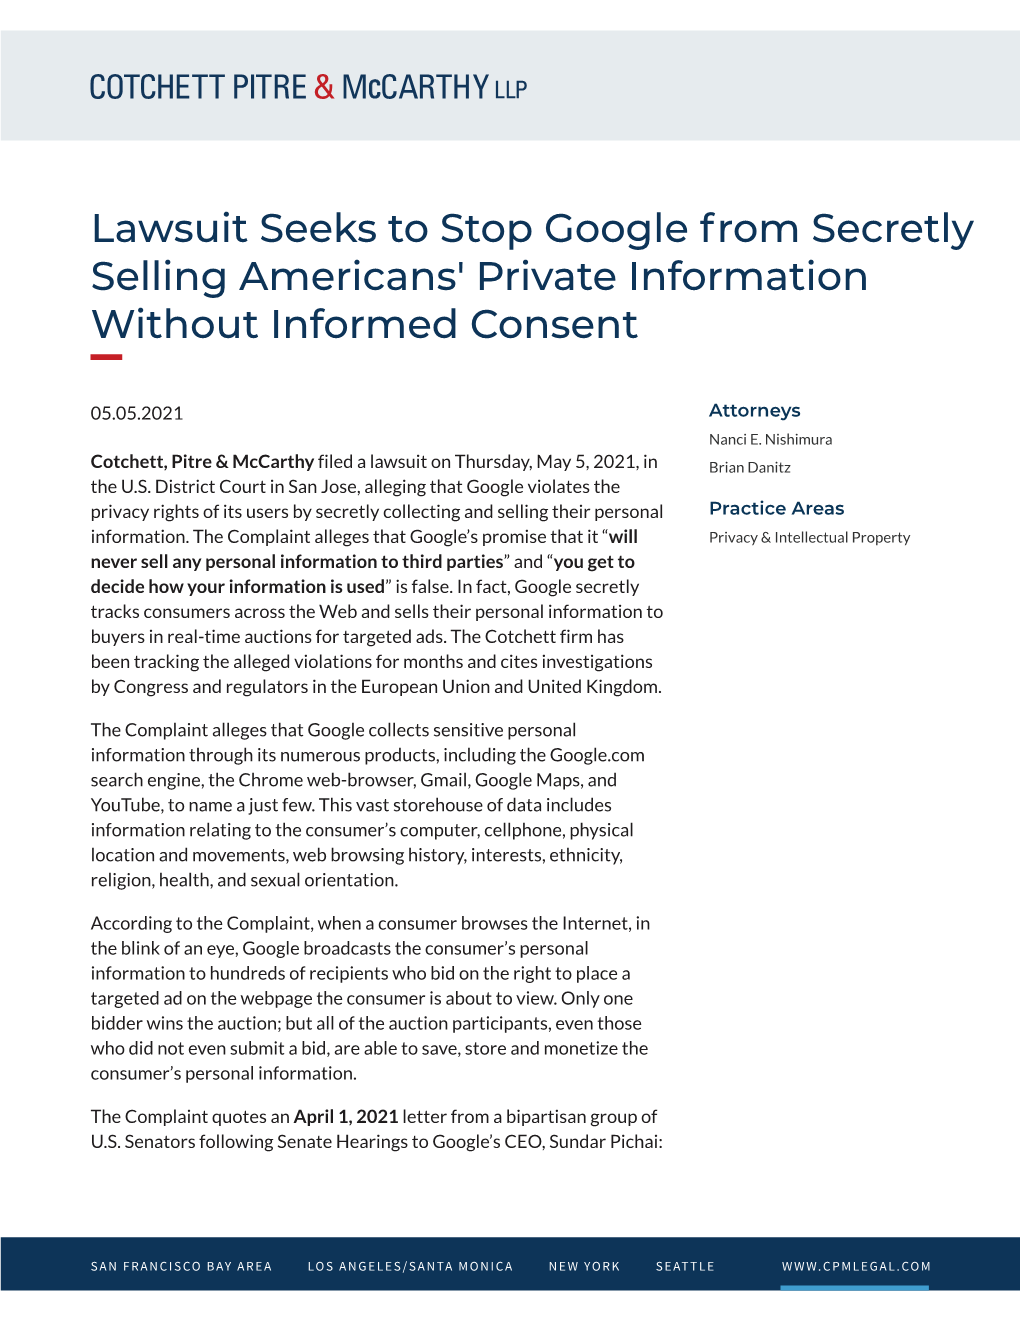 Lawsuit Seeks to Stop Google from Secretly Selling Americans' Private Information Without Informed Consent